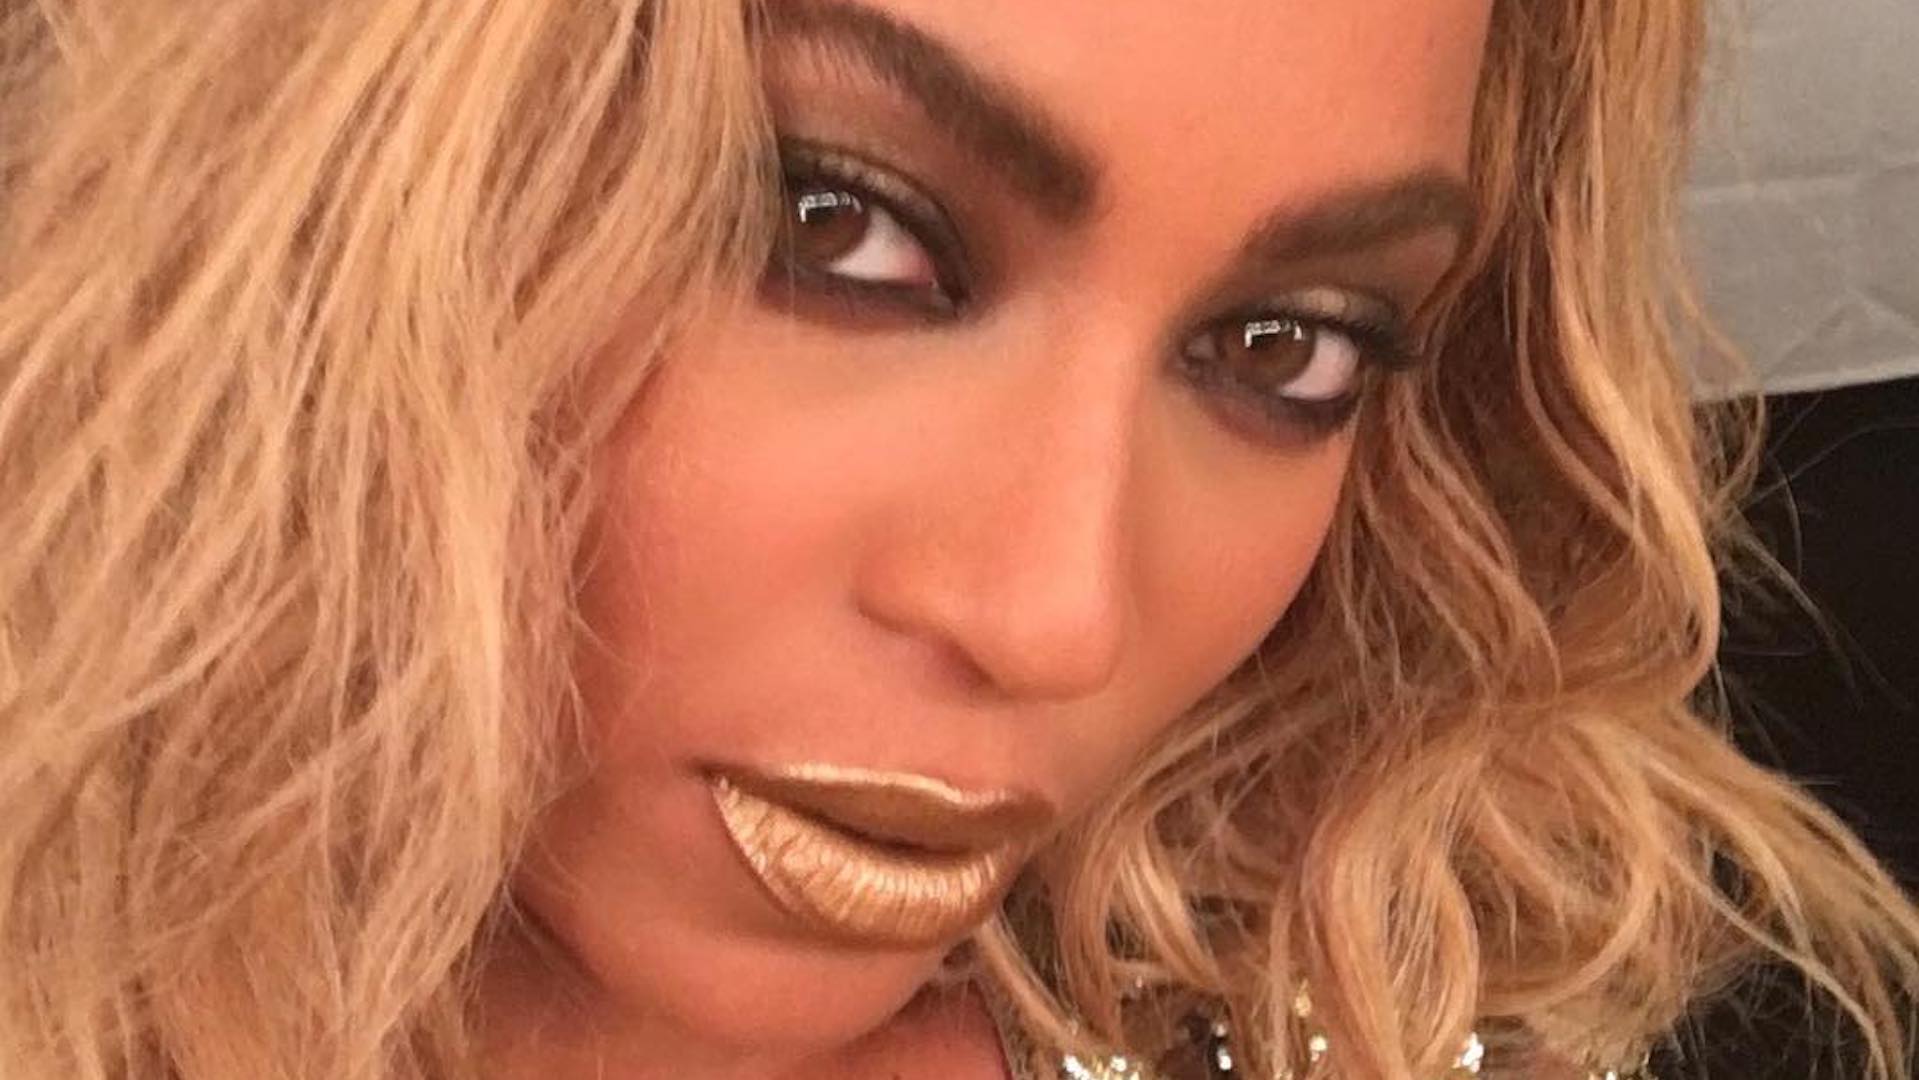 A close up of Beyonce's face